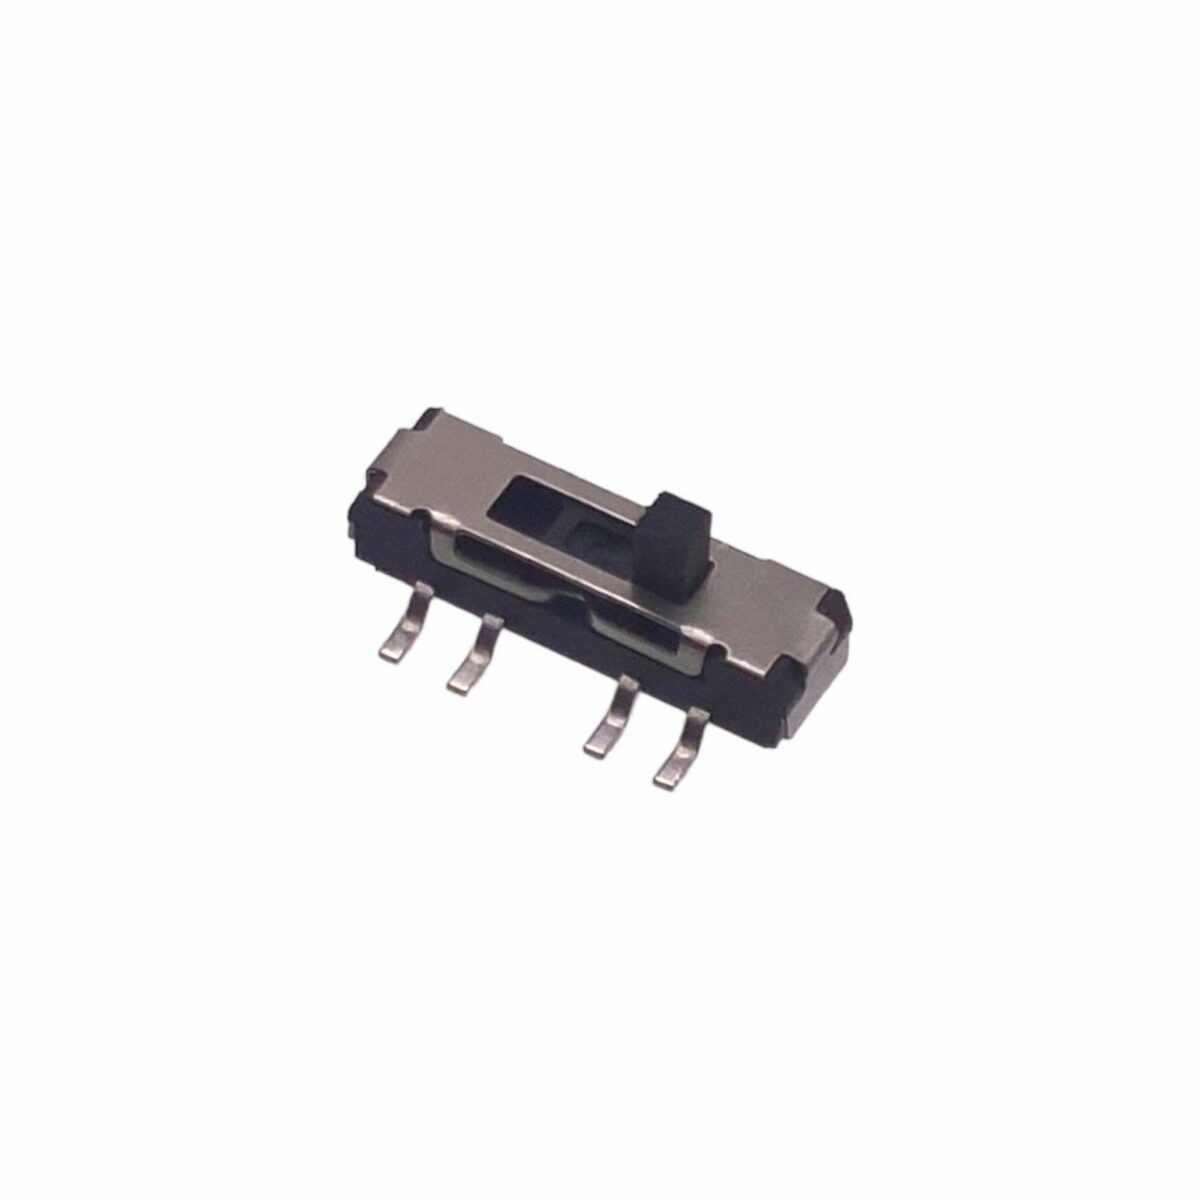 Photo of Bose QuietComfort 35 I, II Replacement Power Switch at Analog Classics